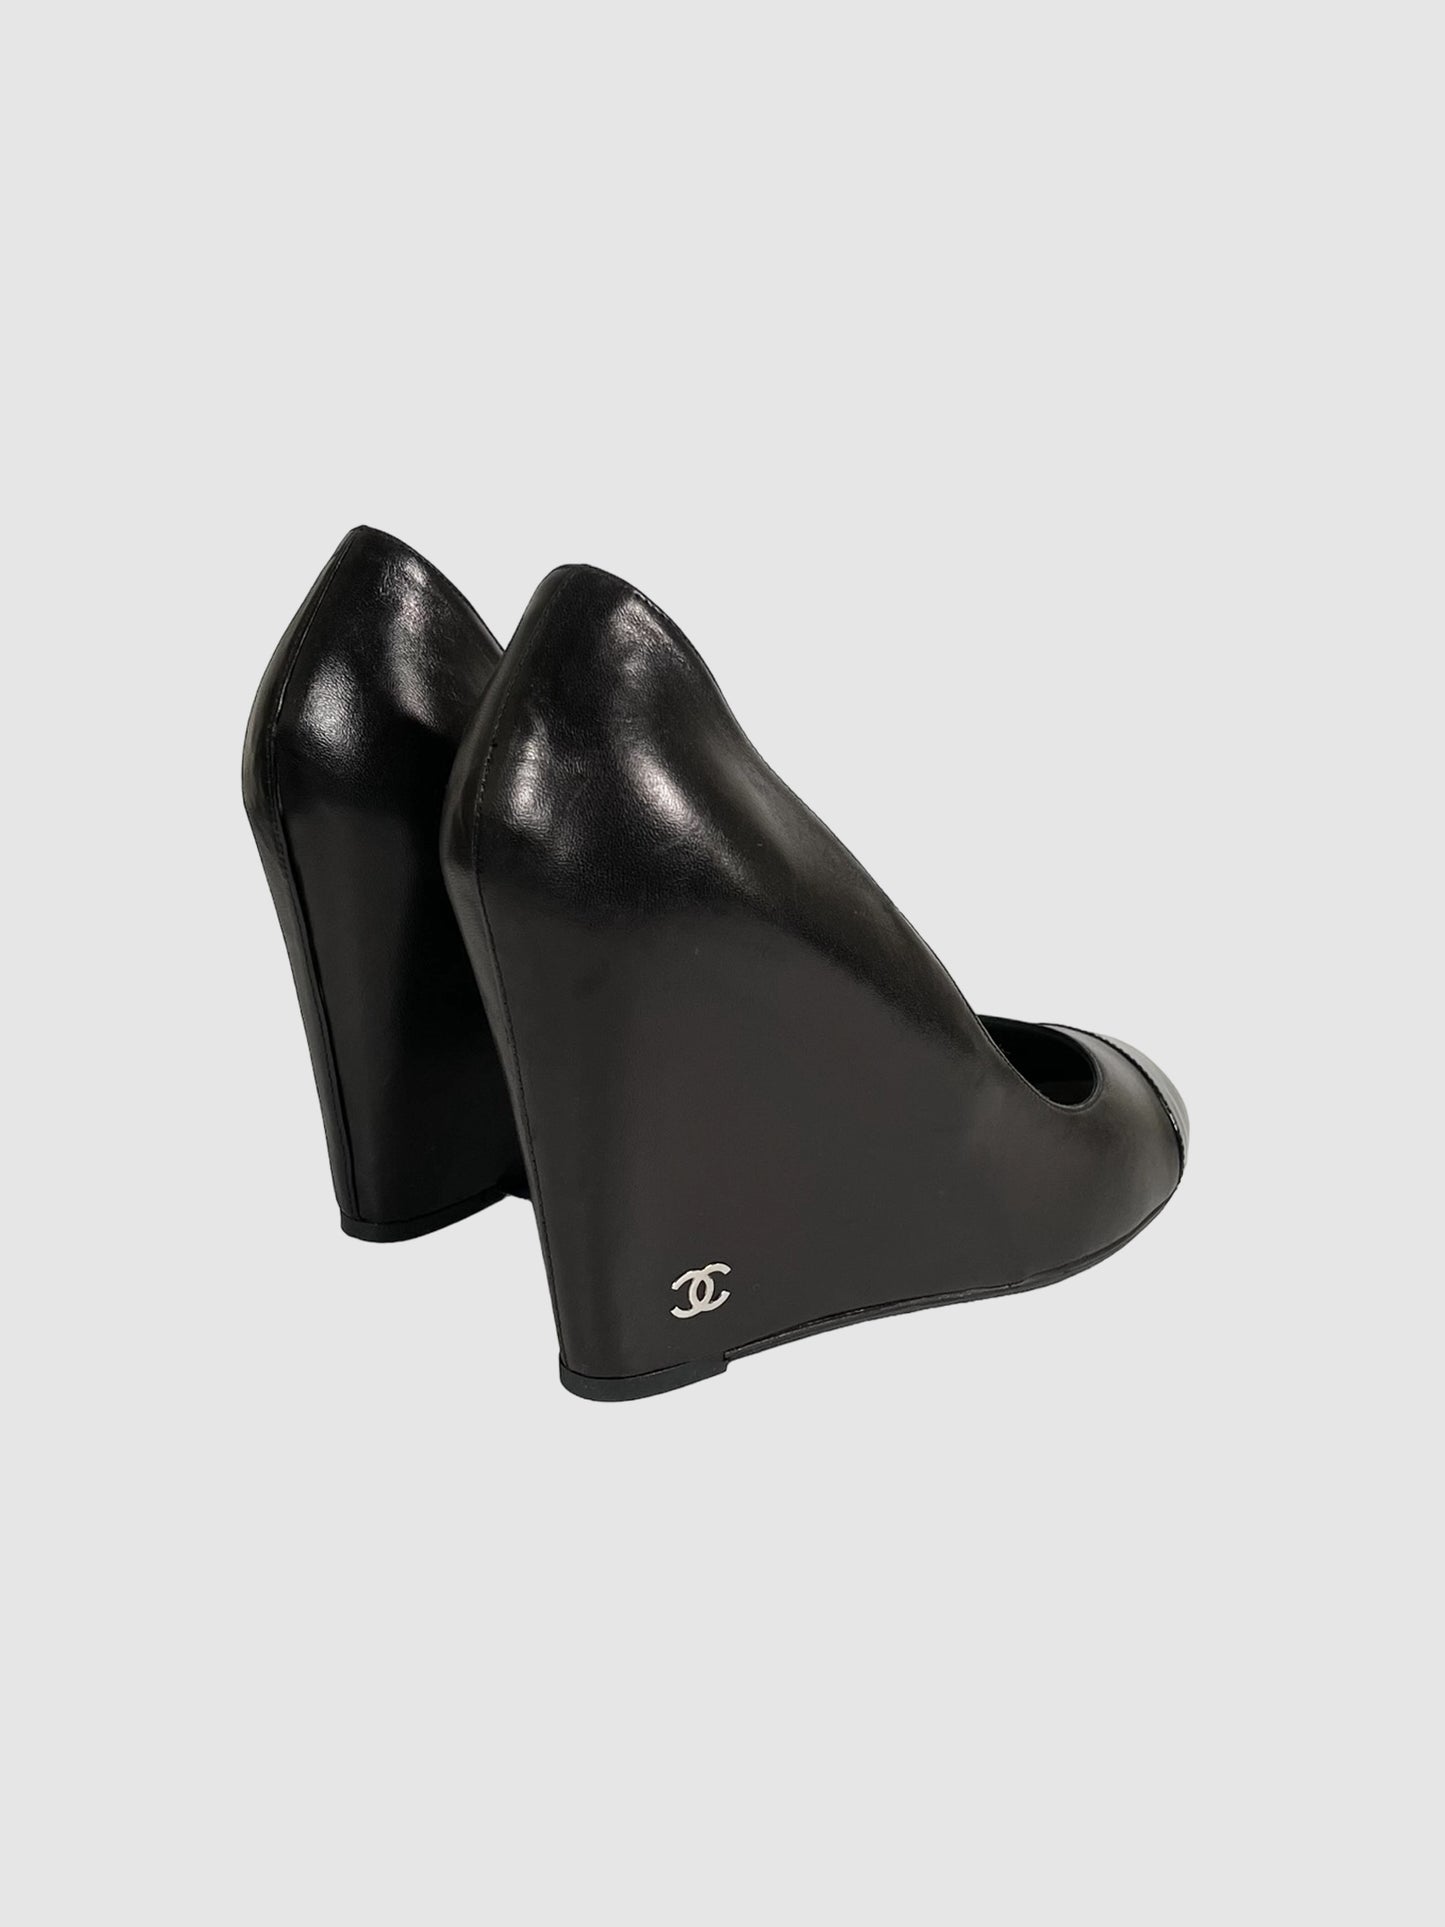 Chanel Leather Wedge Shoes - Size 40